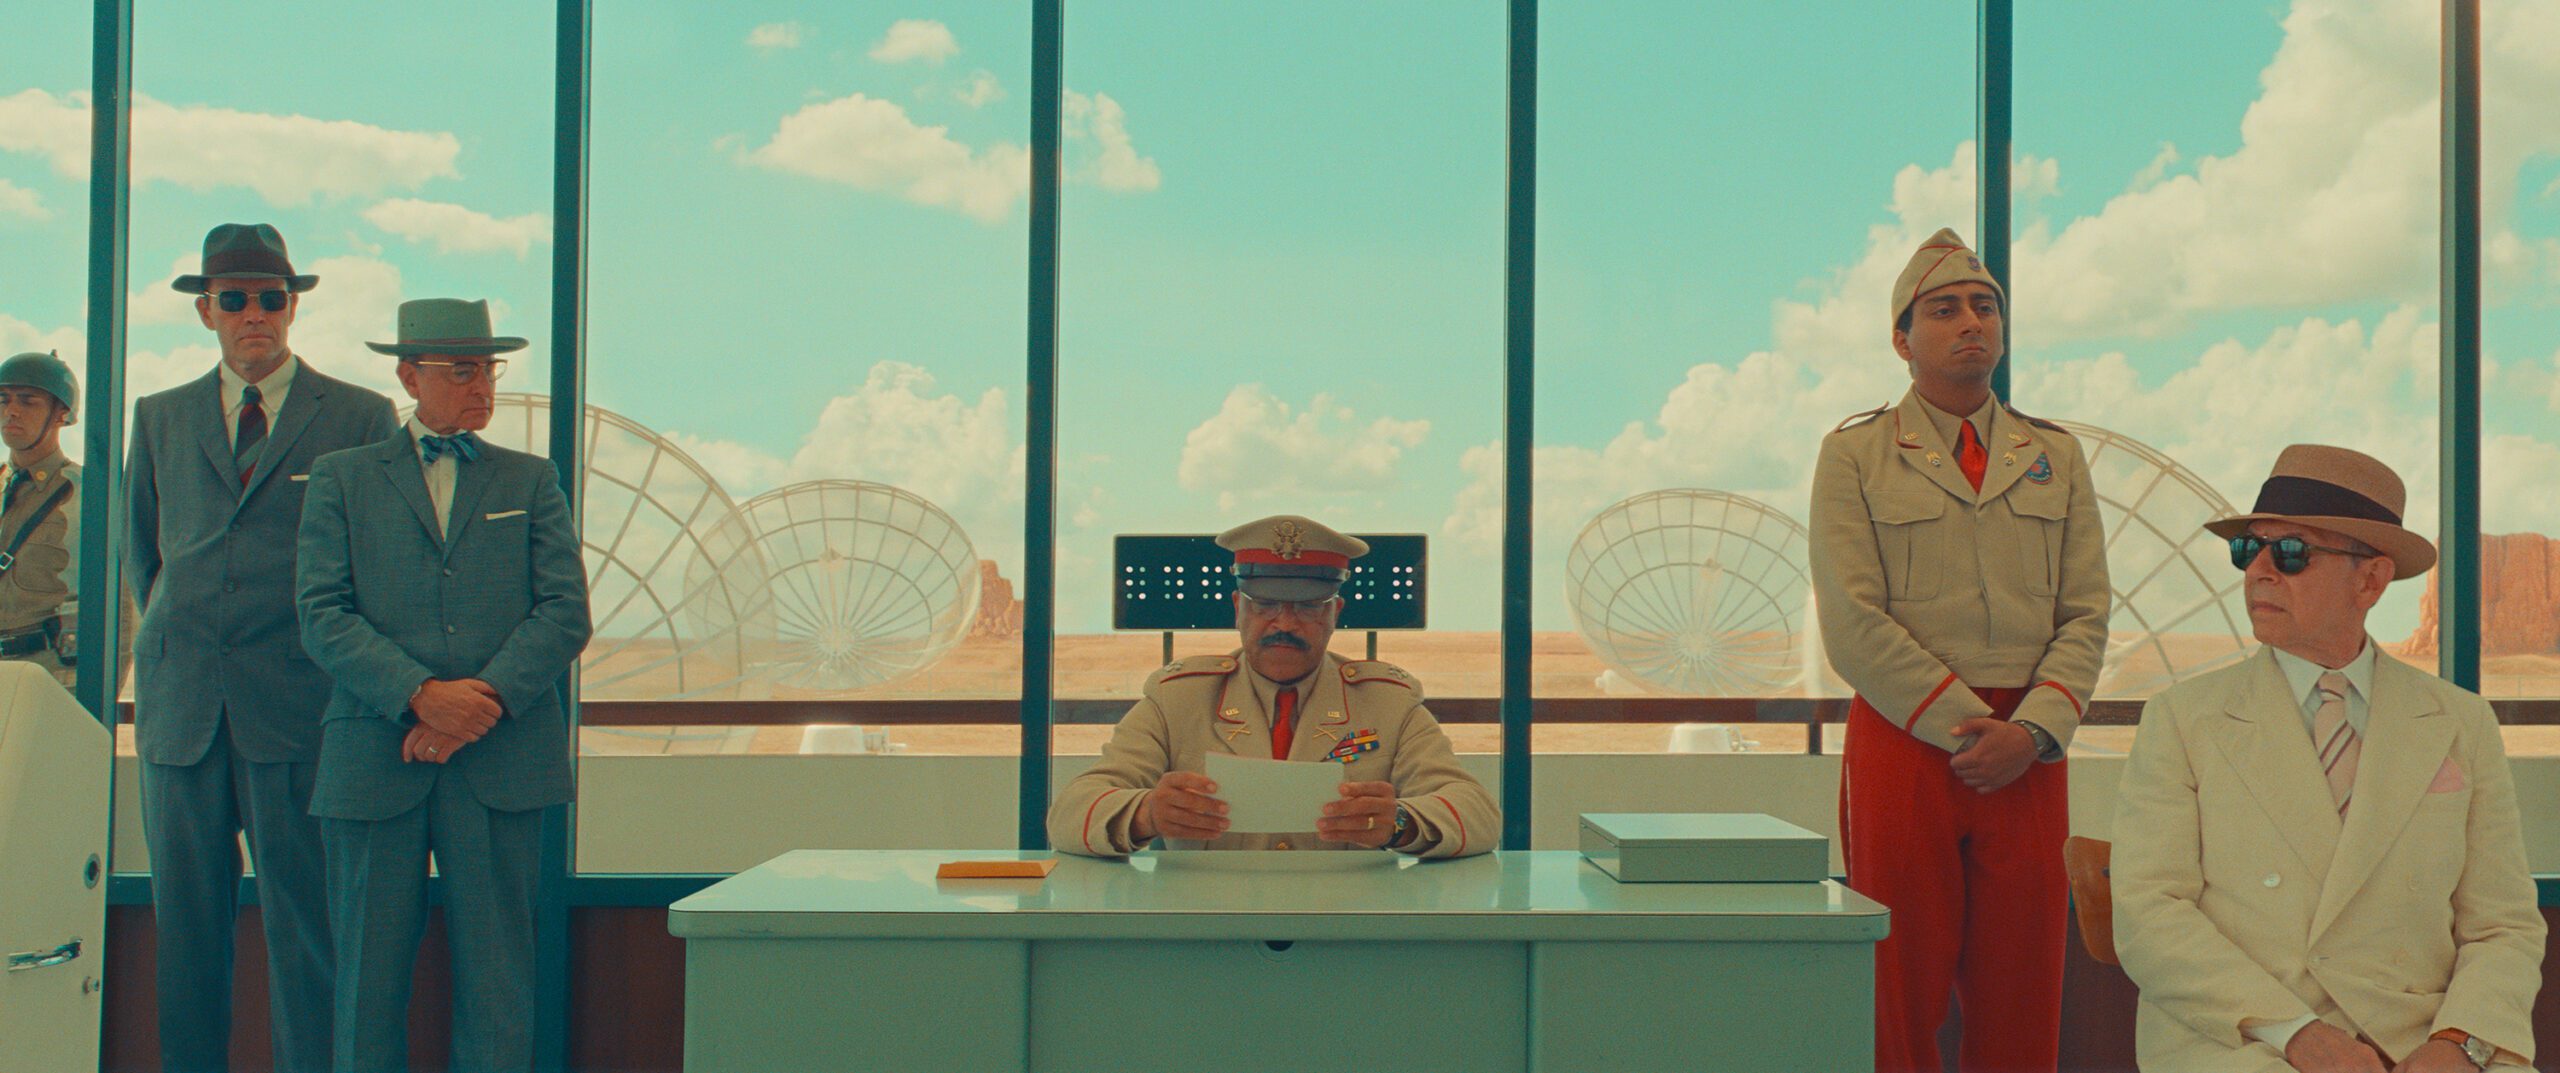 Meet the team that makes Wes Anderson movies look like Wes Anderson